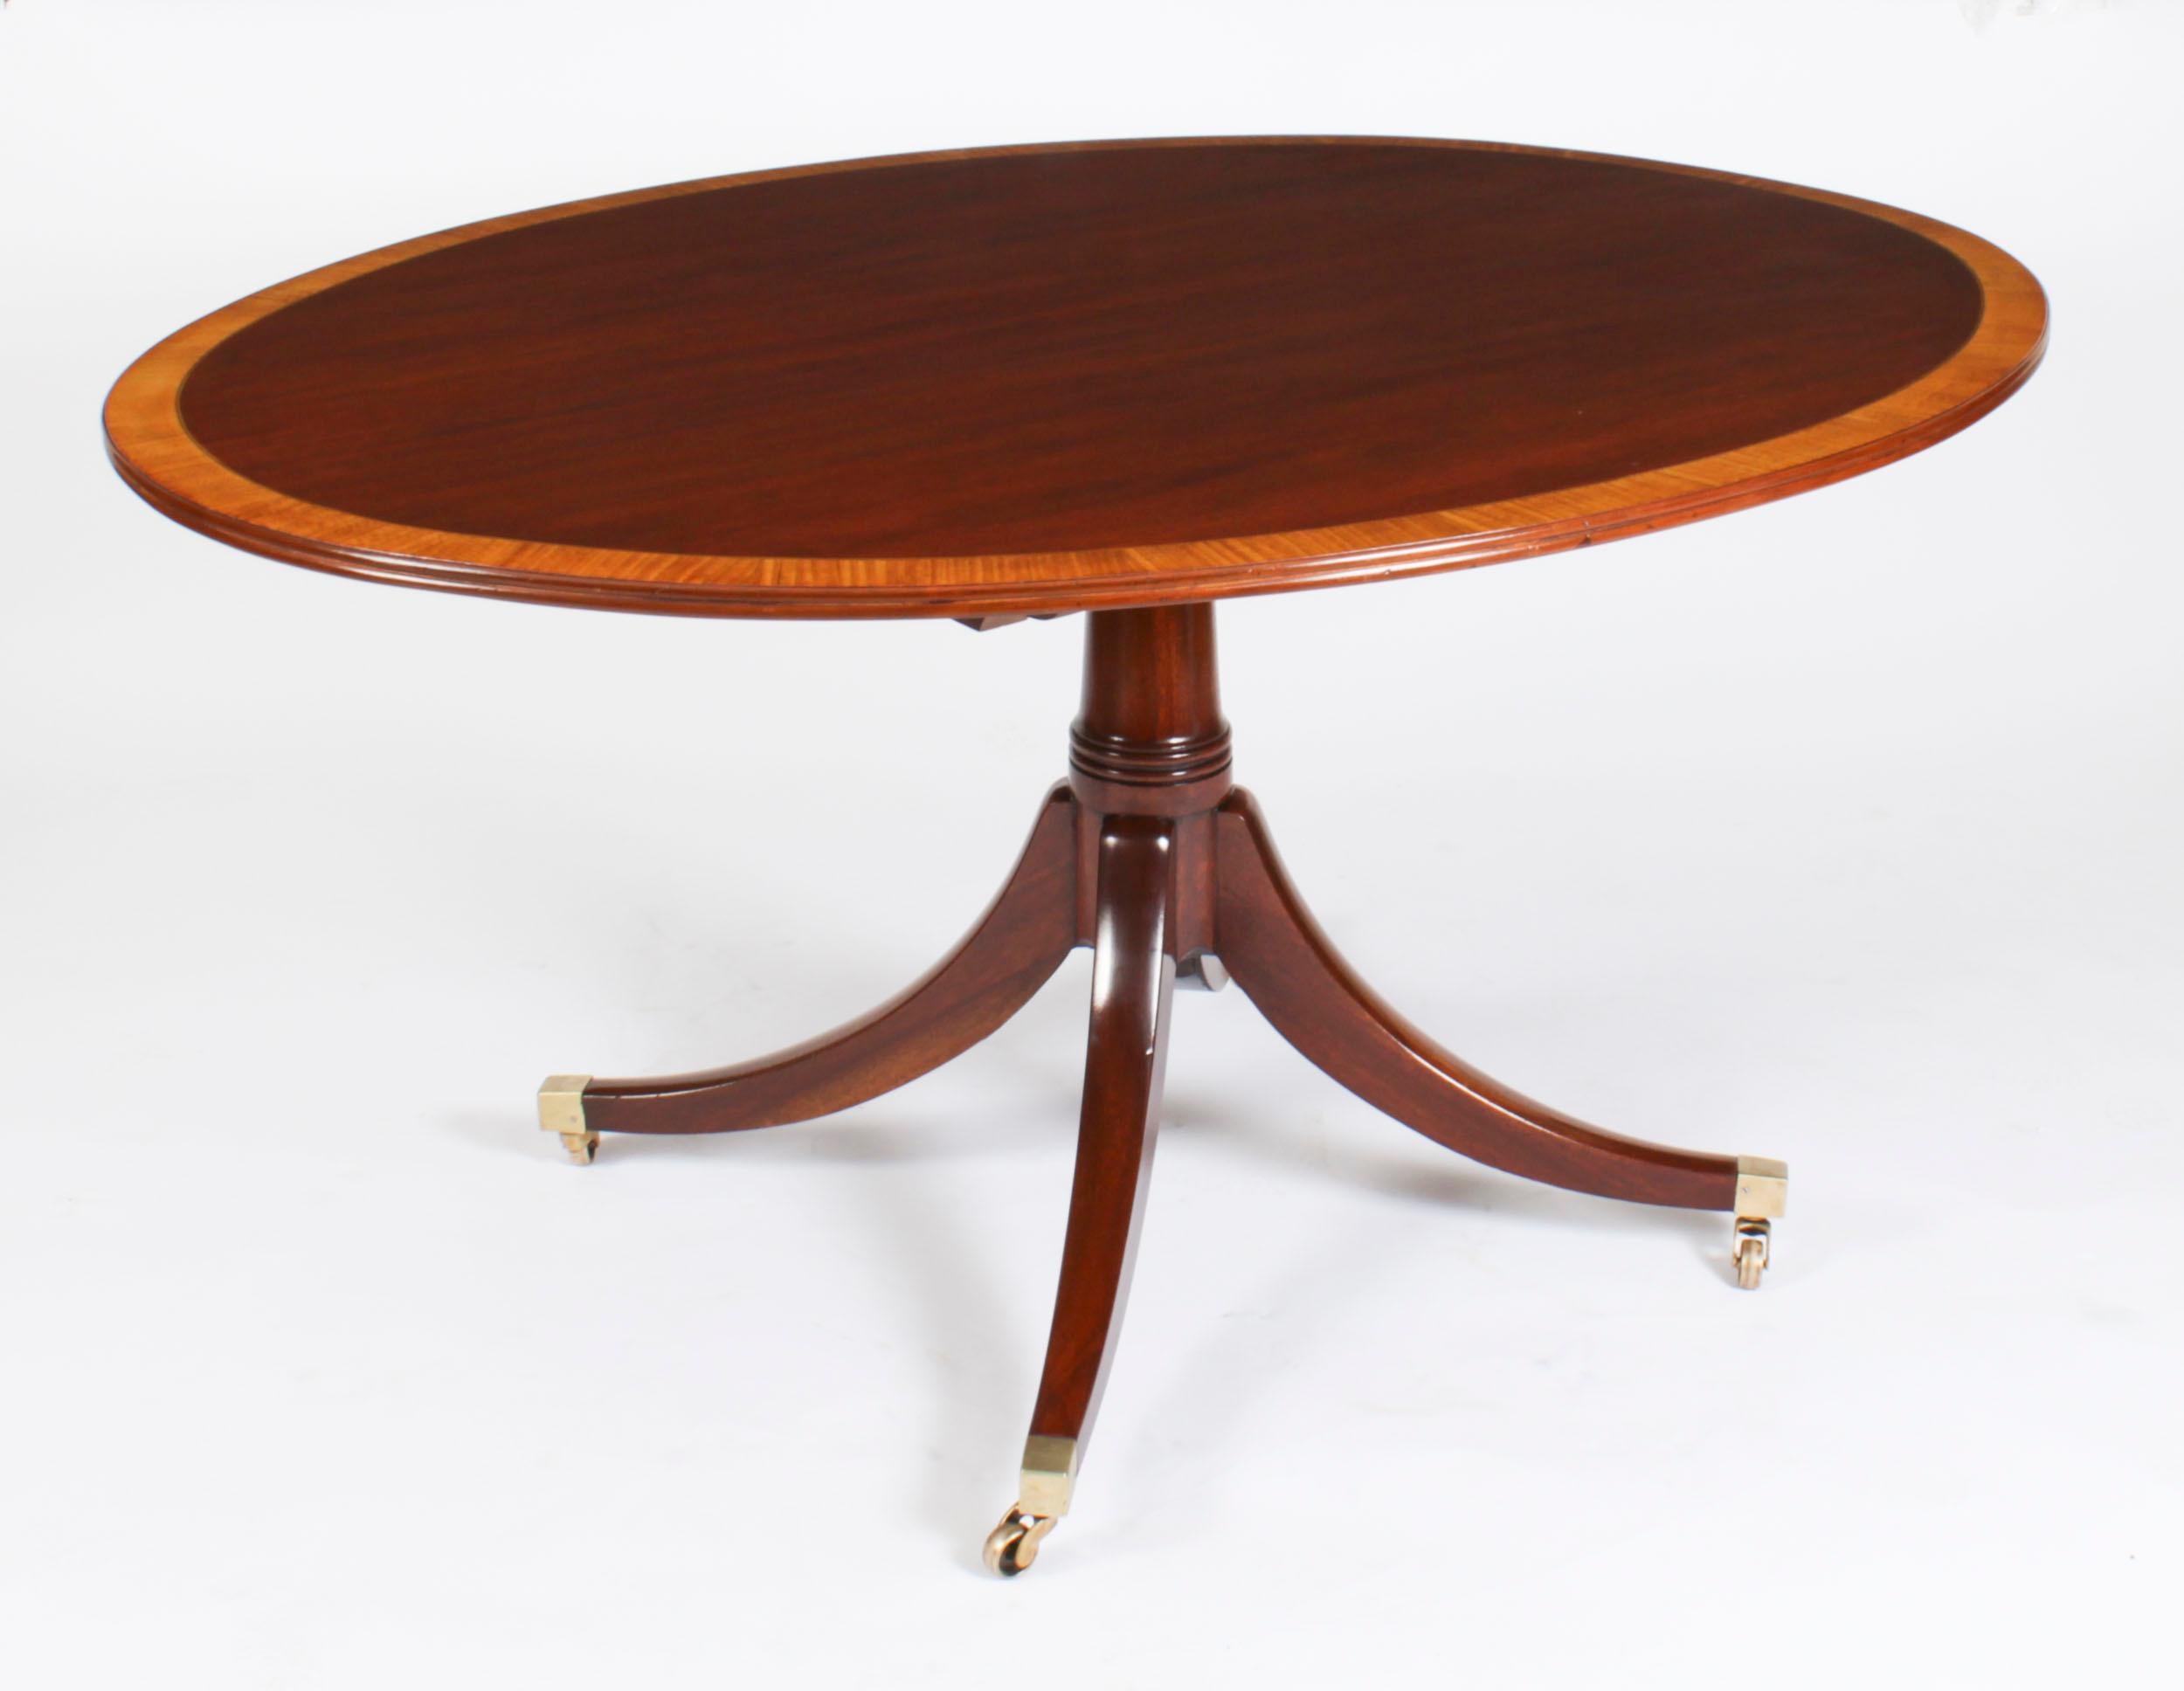 Antique Oval Mahogany Tilt Top Dining Table, Early 20th Century For Sale 10